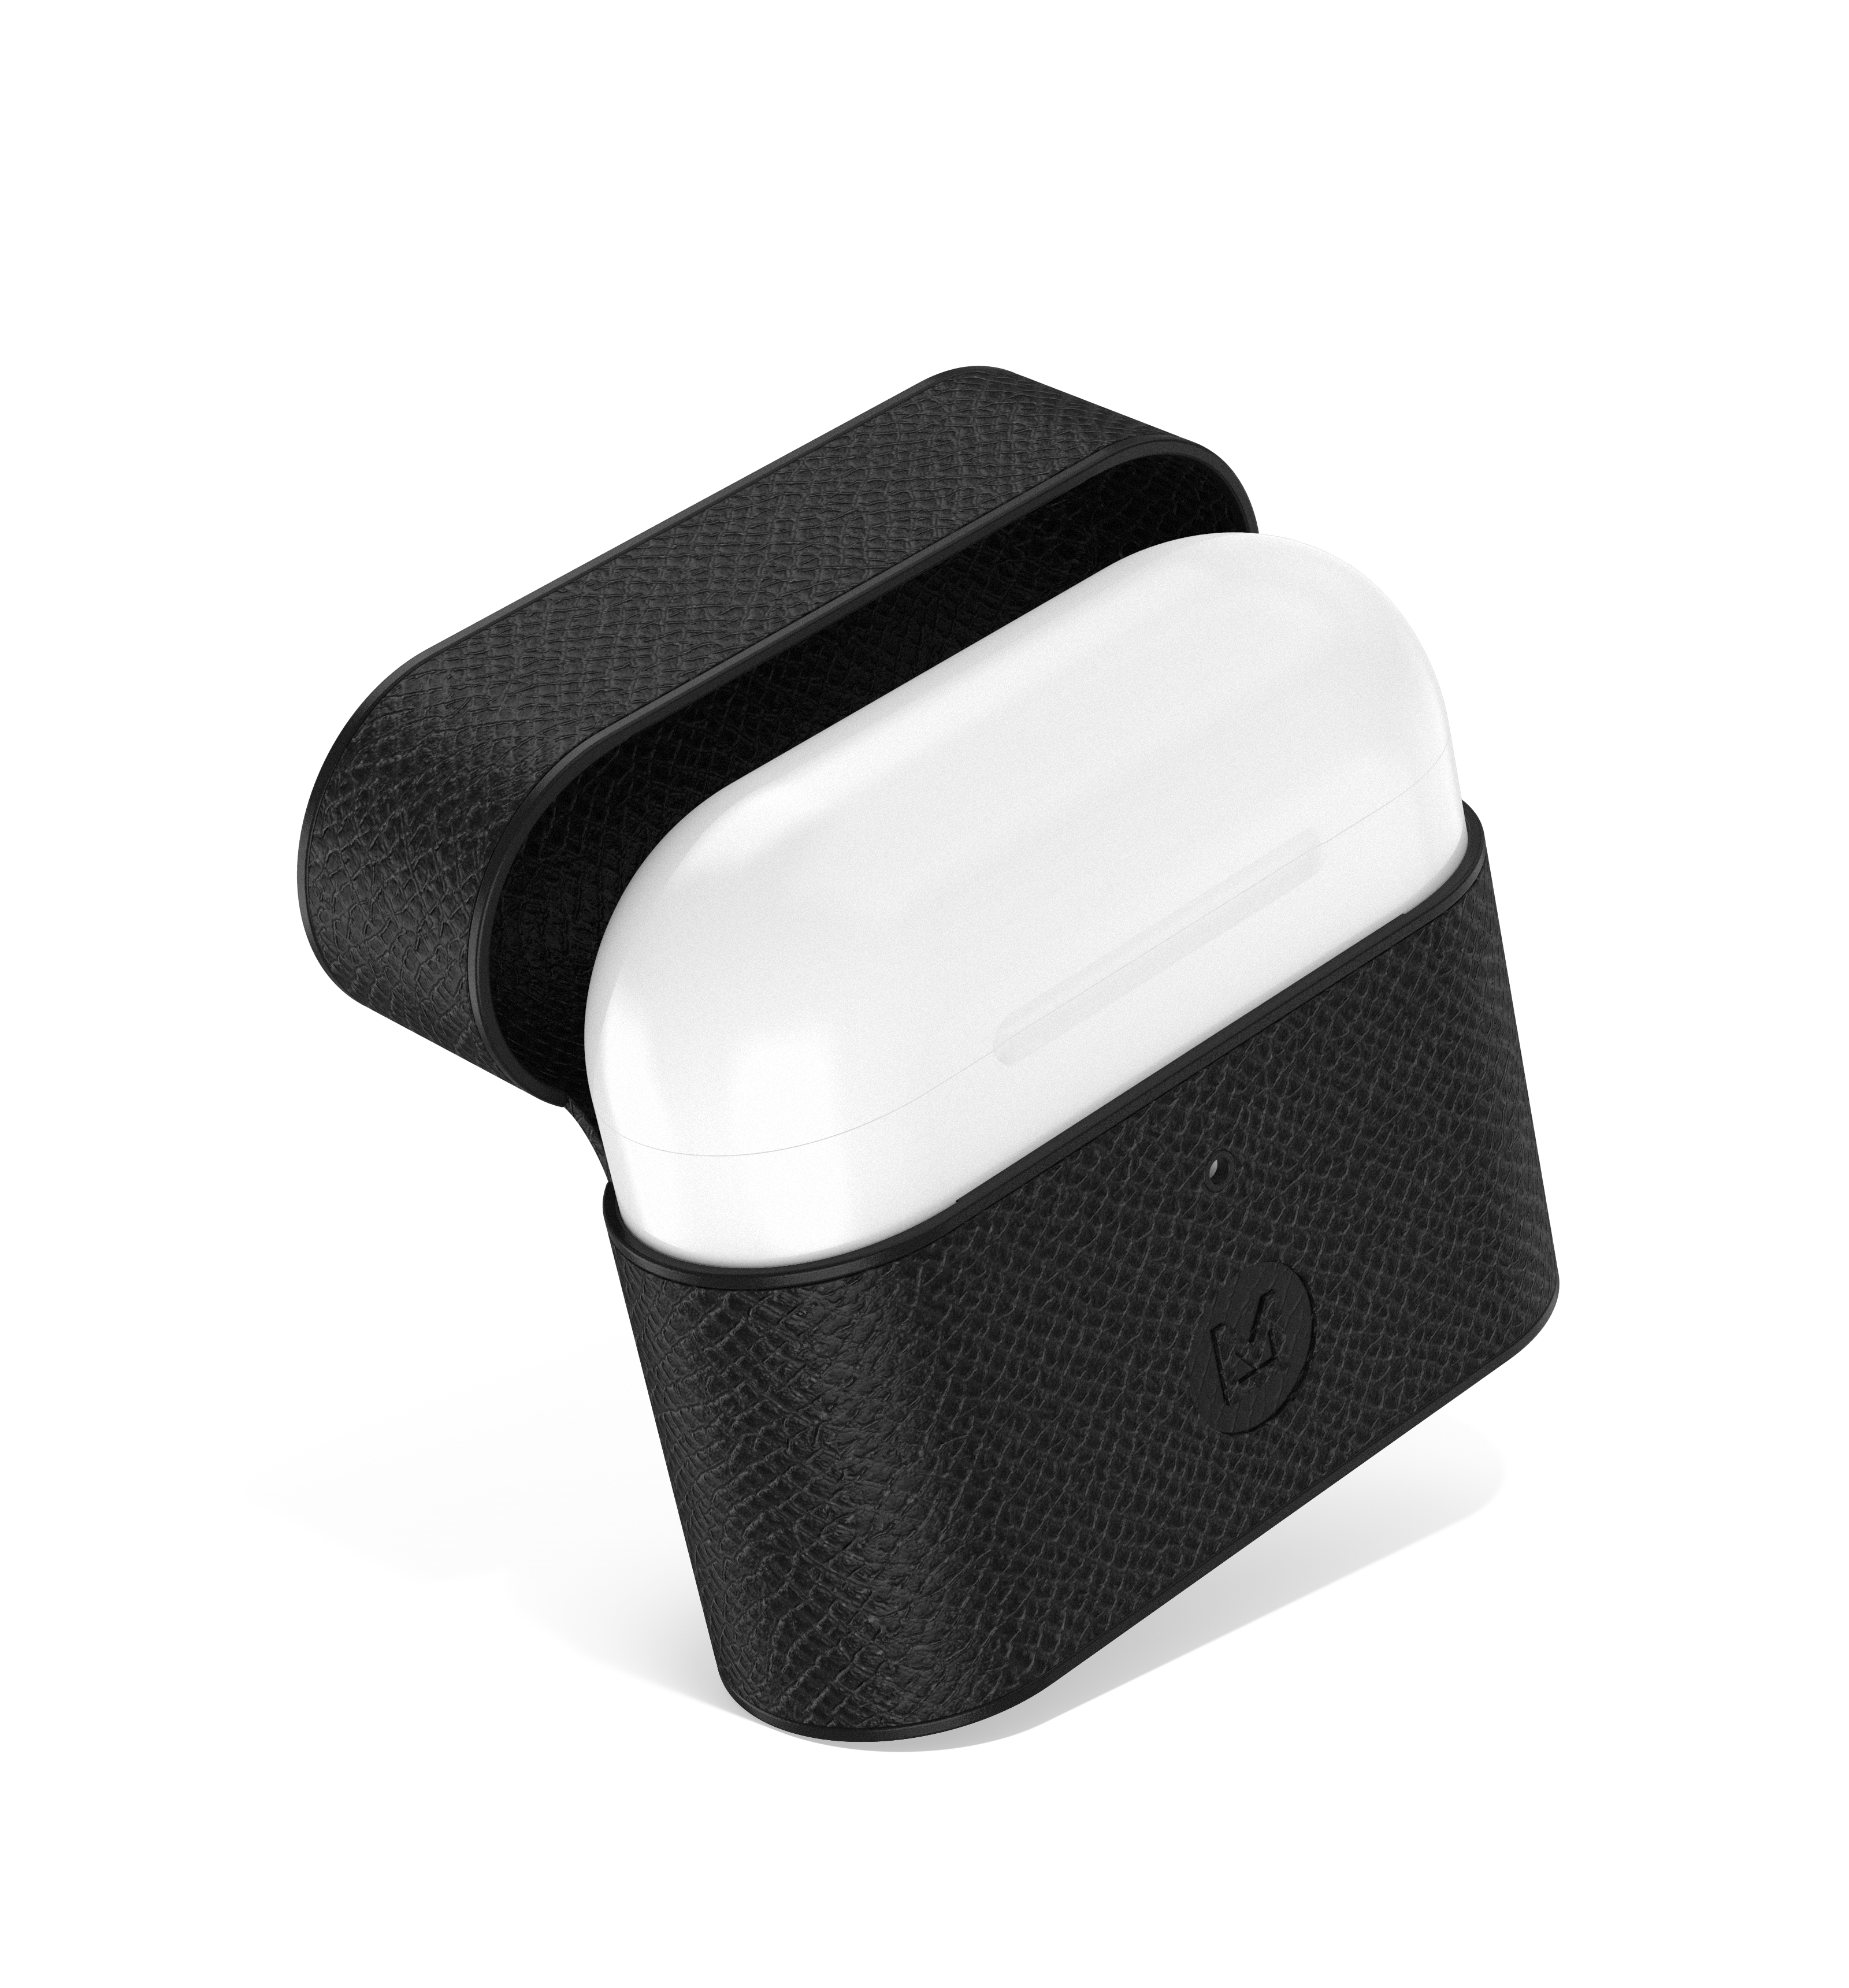 Mason airpod case protector with airpod charging case inside